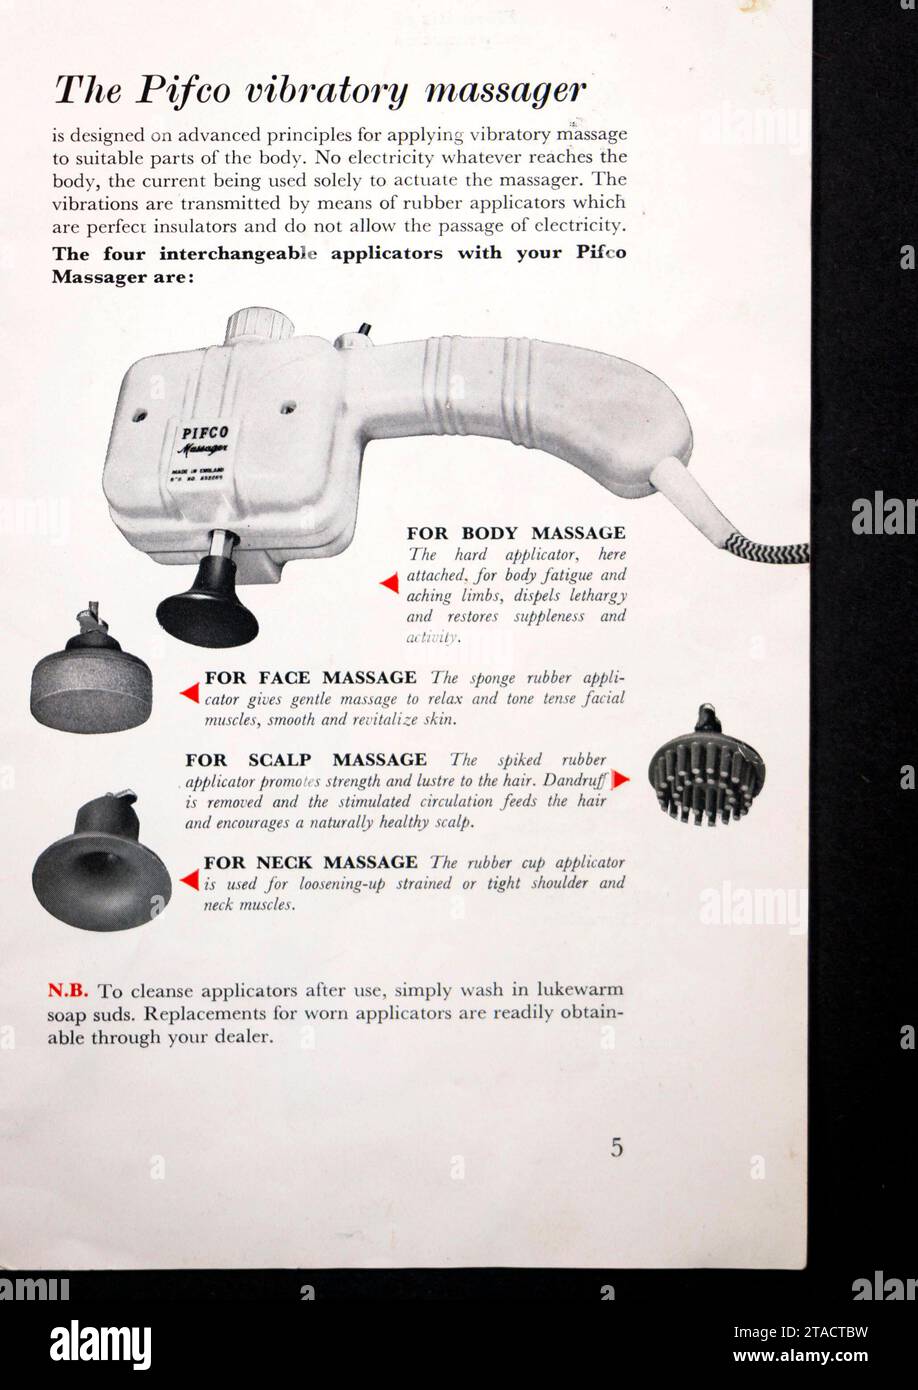 https://c8.alamy.com/comp/2TACTBW/vintage-instruction-manual-for-pifco-brand-vibratory-massager-electric-to-releive-pain-and-aches-2TACTBW.jpg